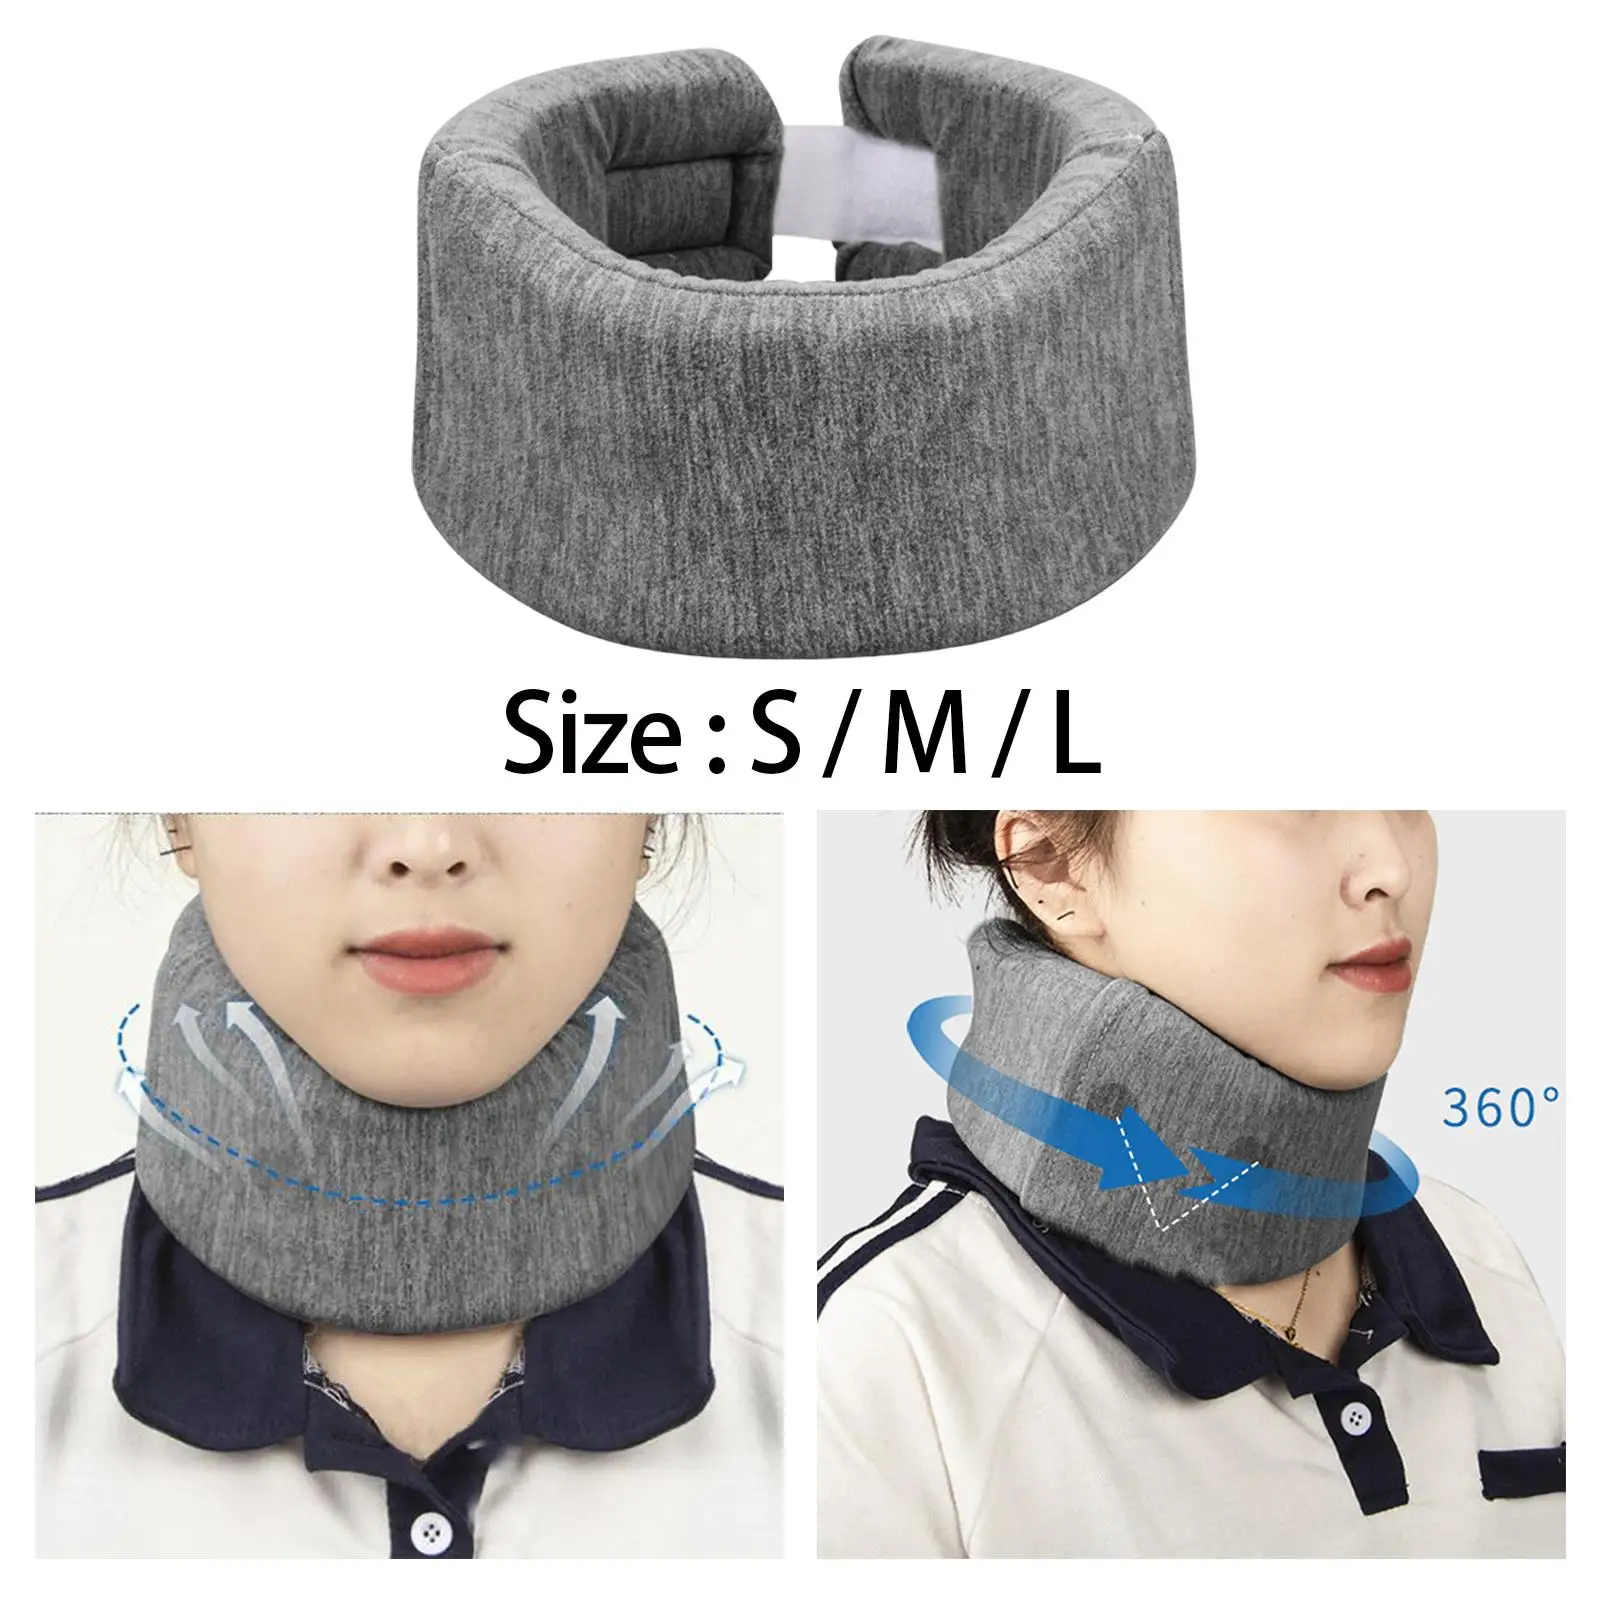 Traveling Pillow Travel Essentials Soft Portable Comfortable Neck Pillow for Traveling on Airplane for Car Travel Home Rest Use